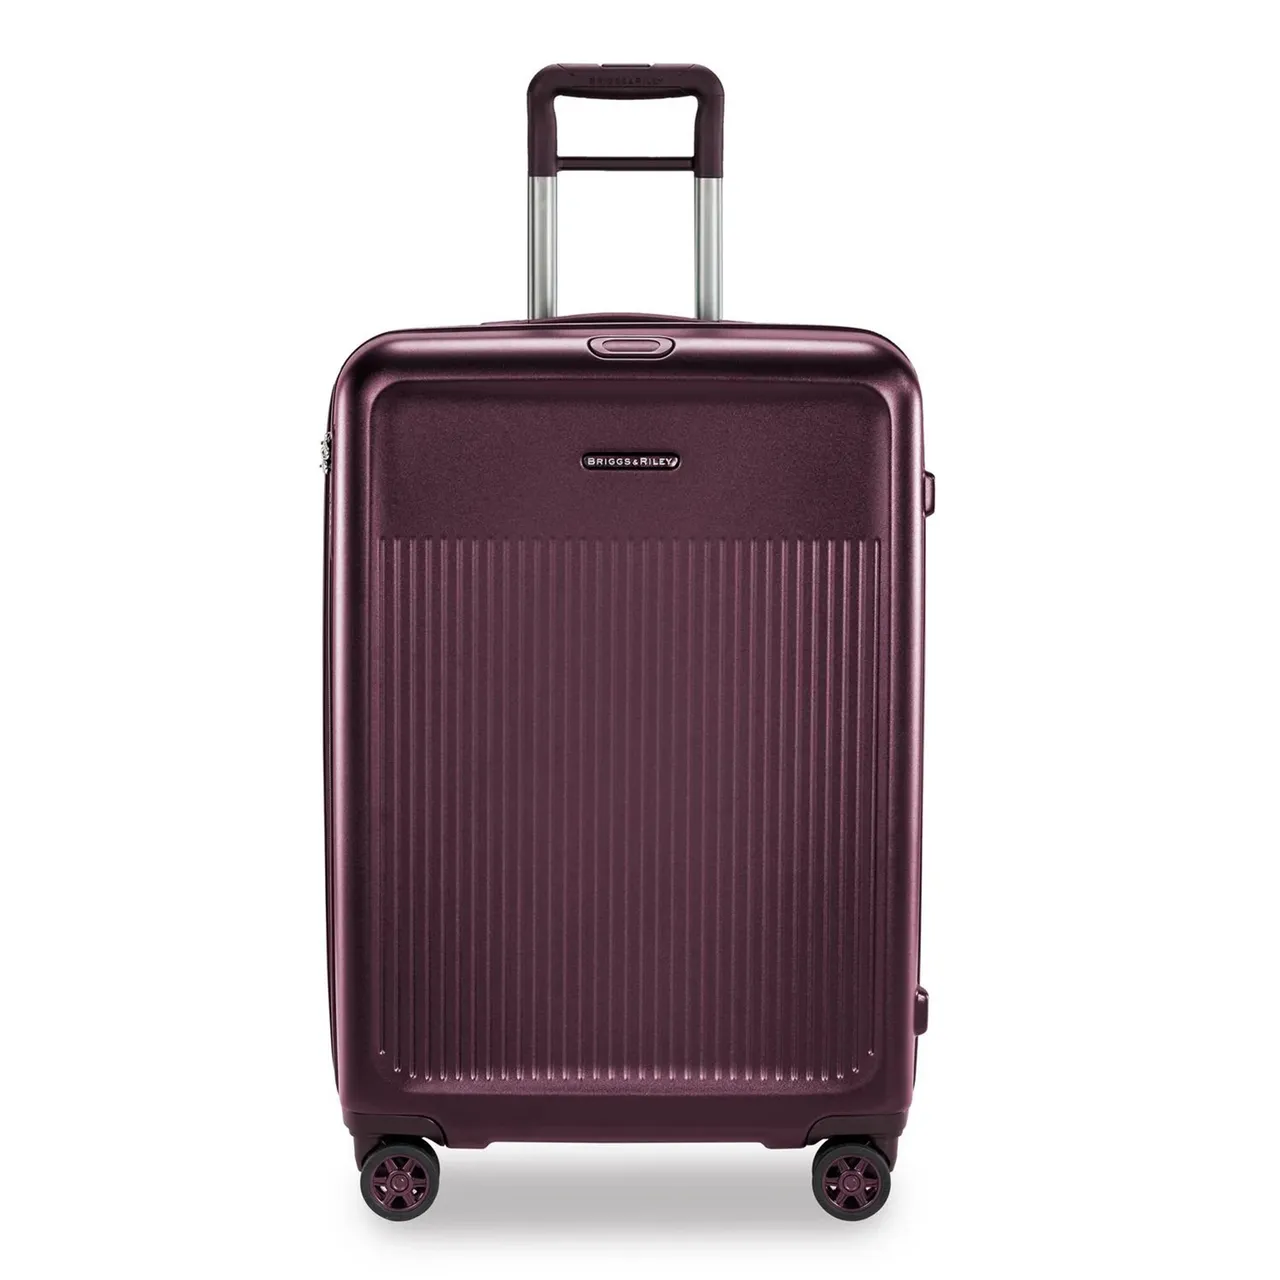 The top hard-shell luggage